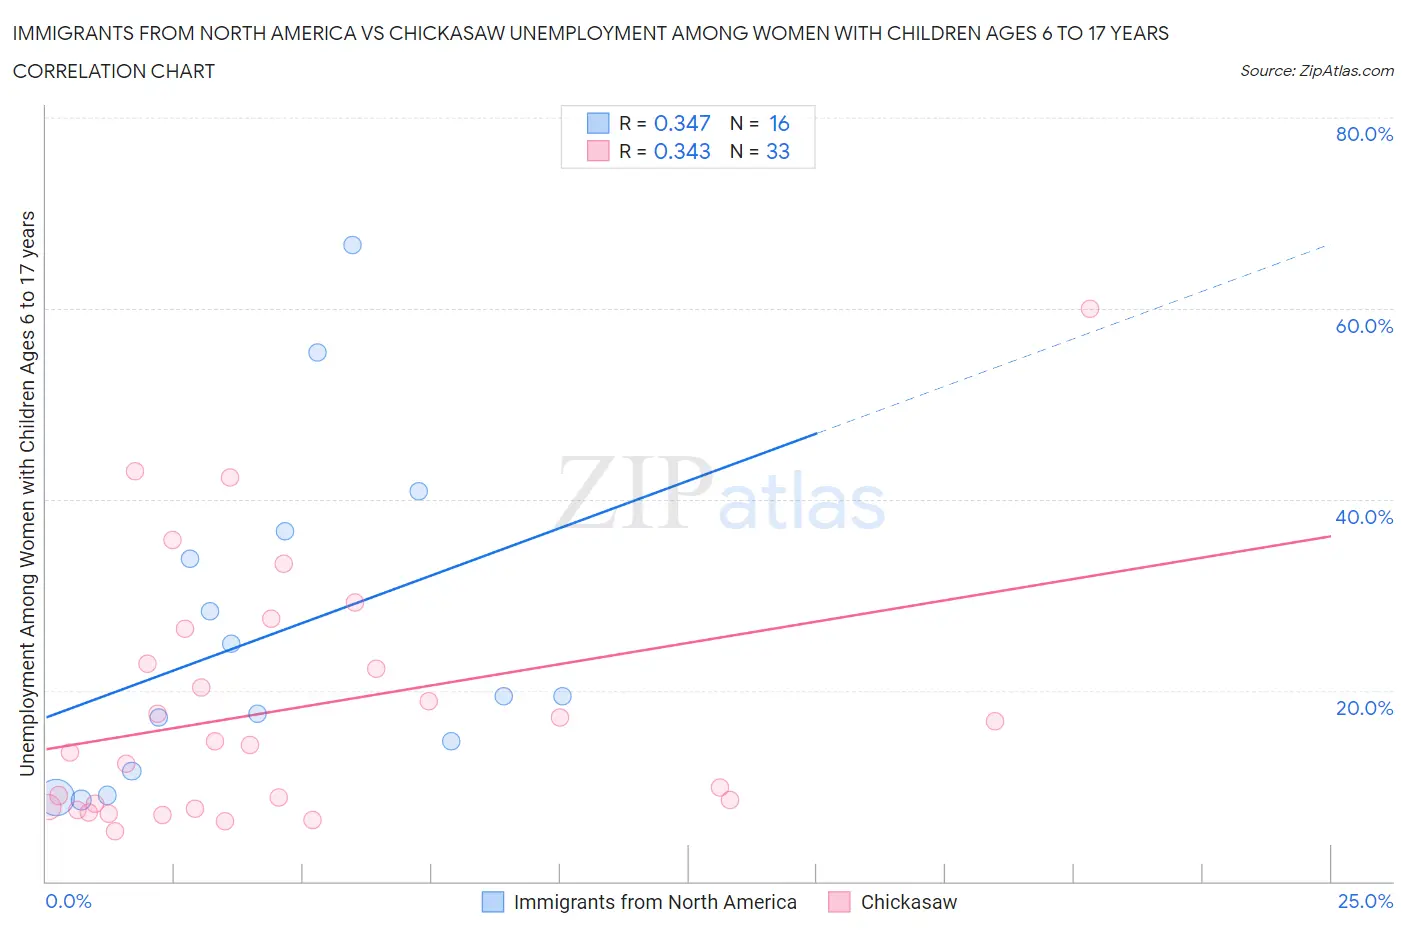 Immigrants from North America vs Chickasaw Unemployment Among Women with Children Ages 6 to 17 years